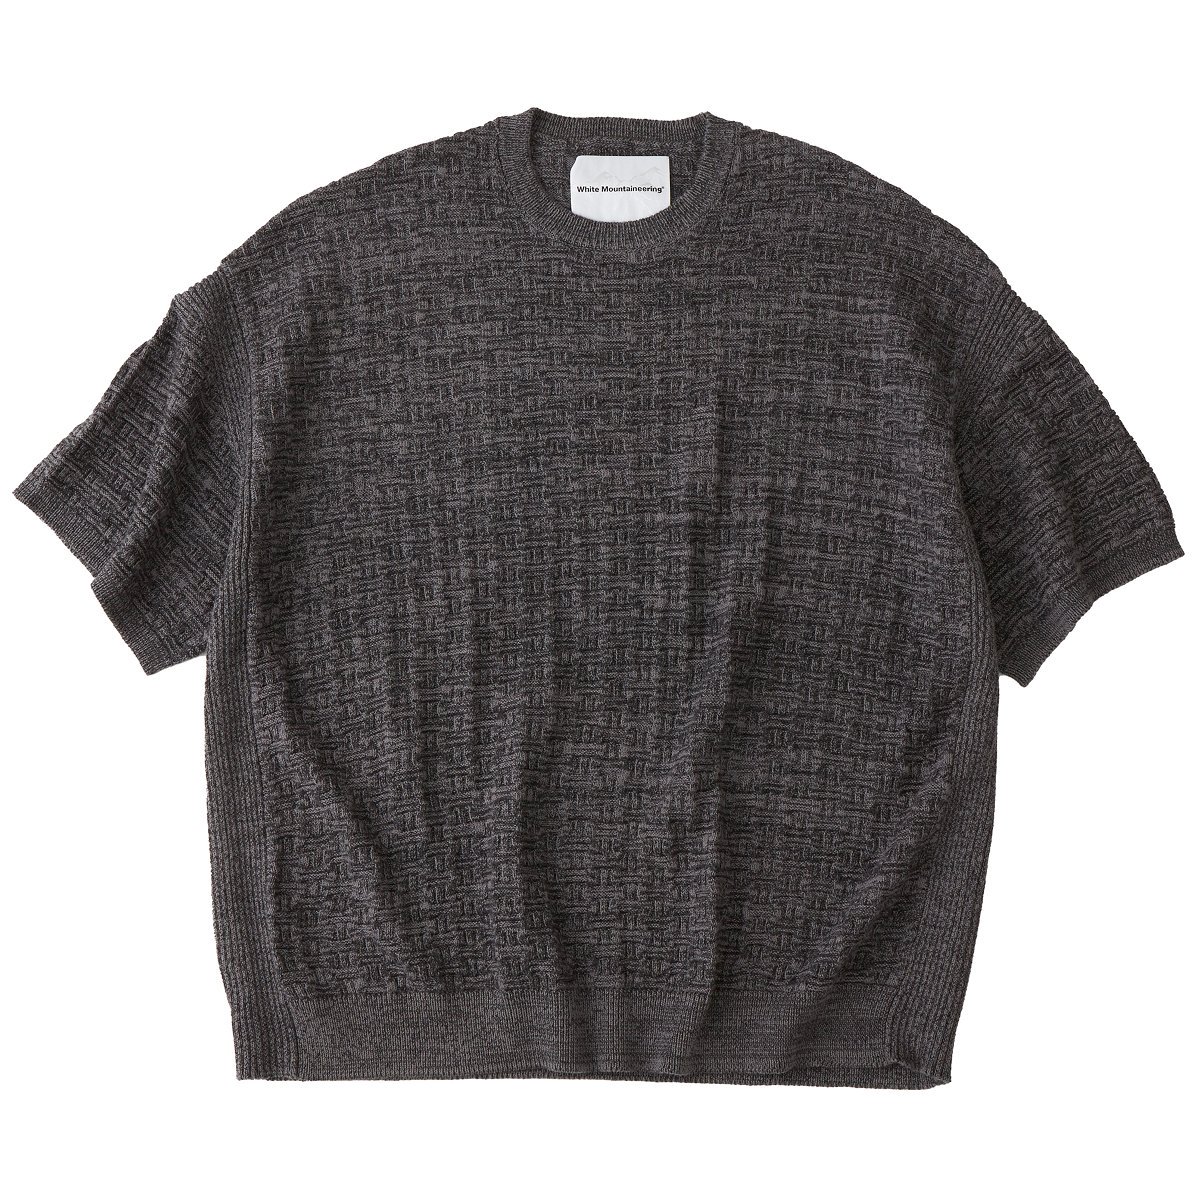 White<BR>Mountaineering<BR> COTTON KNIT T-SHIRT